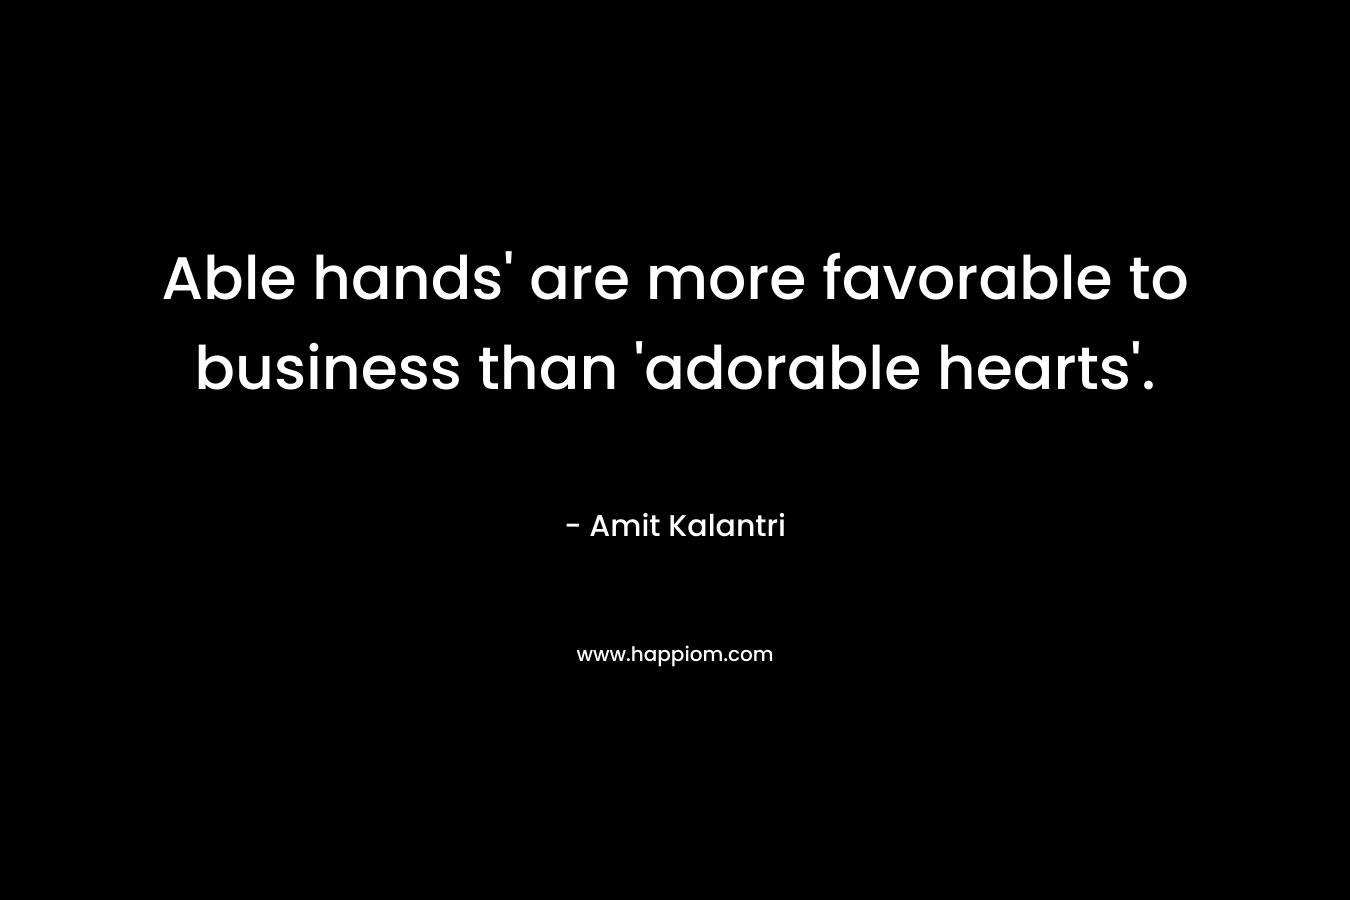 Able hands' are more favorable to business than 'adorable hearts'.